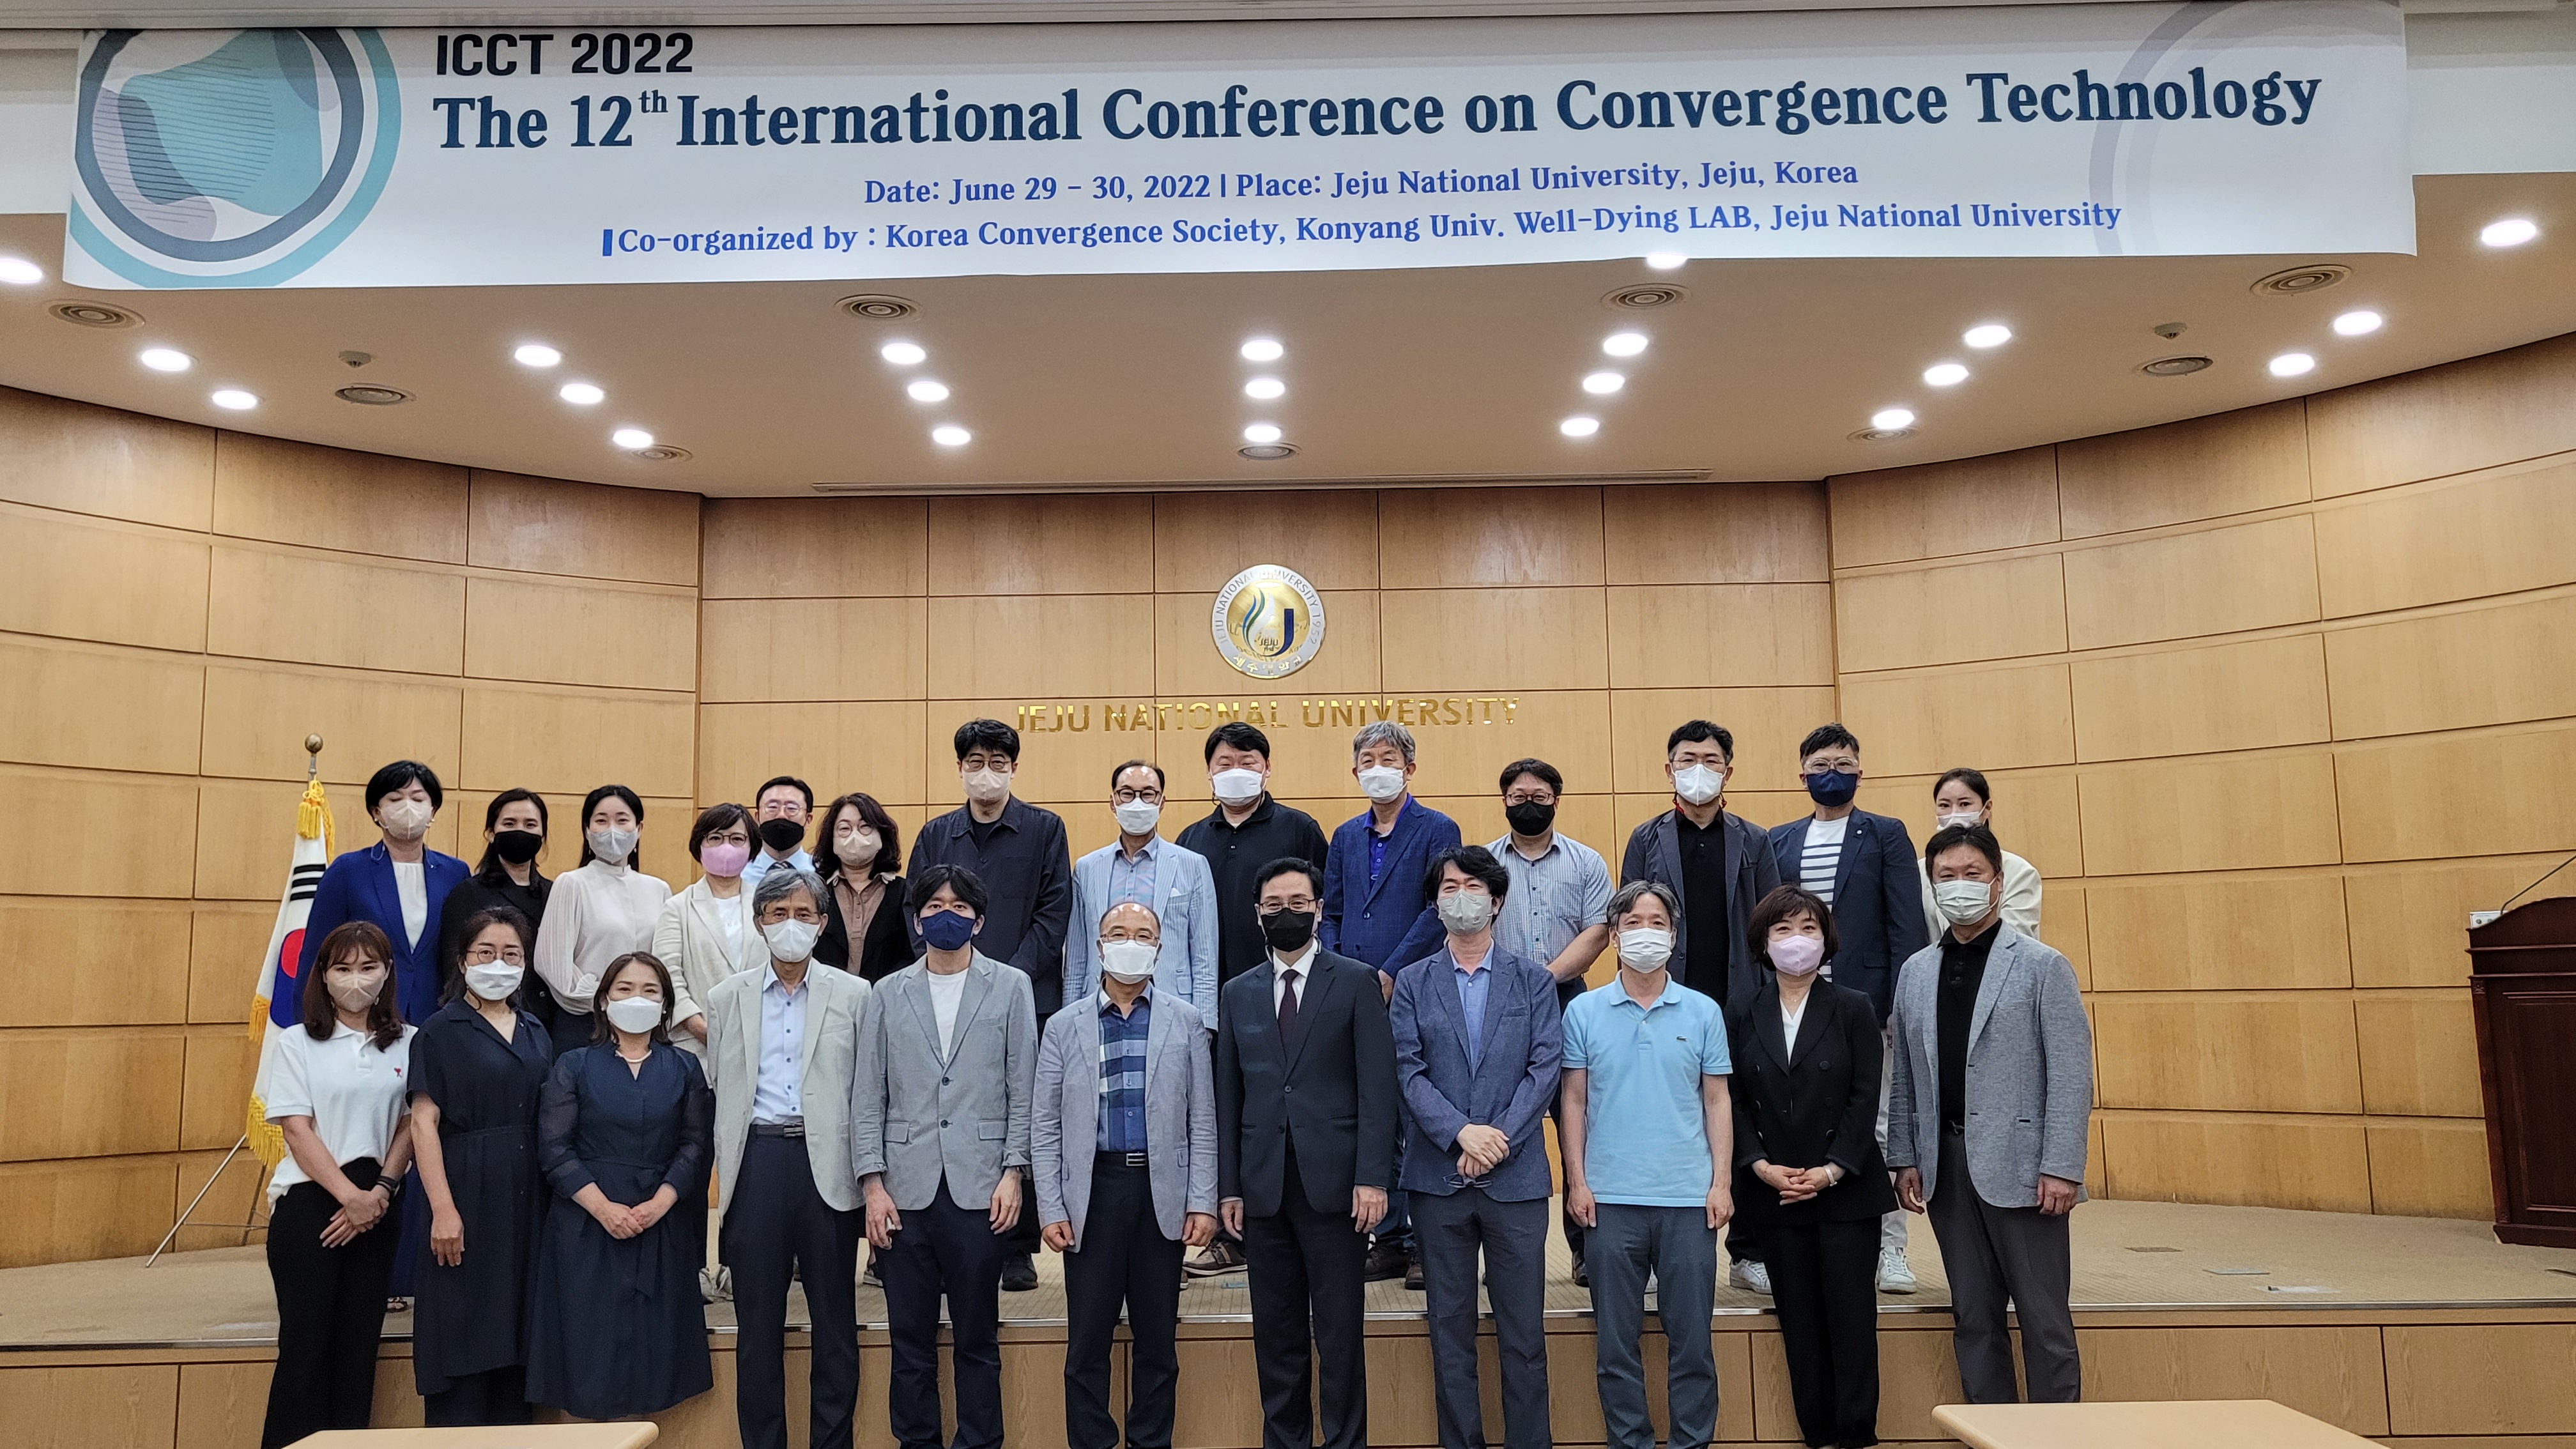 The 12th International Conference on Convergence Technology in 2022